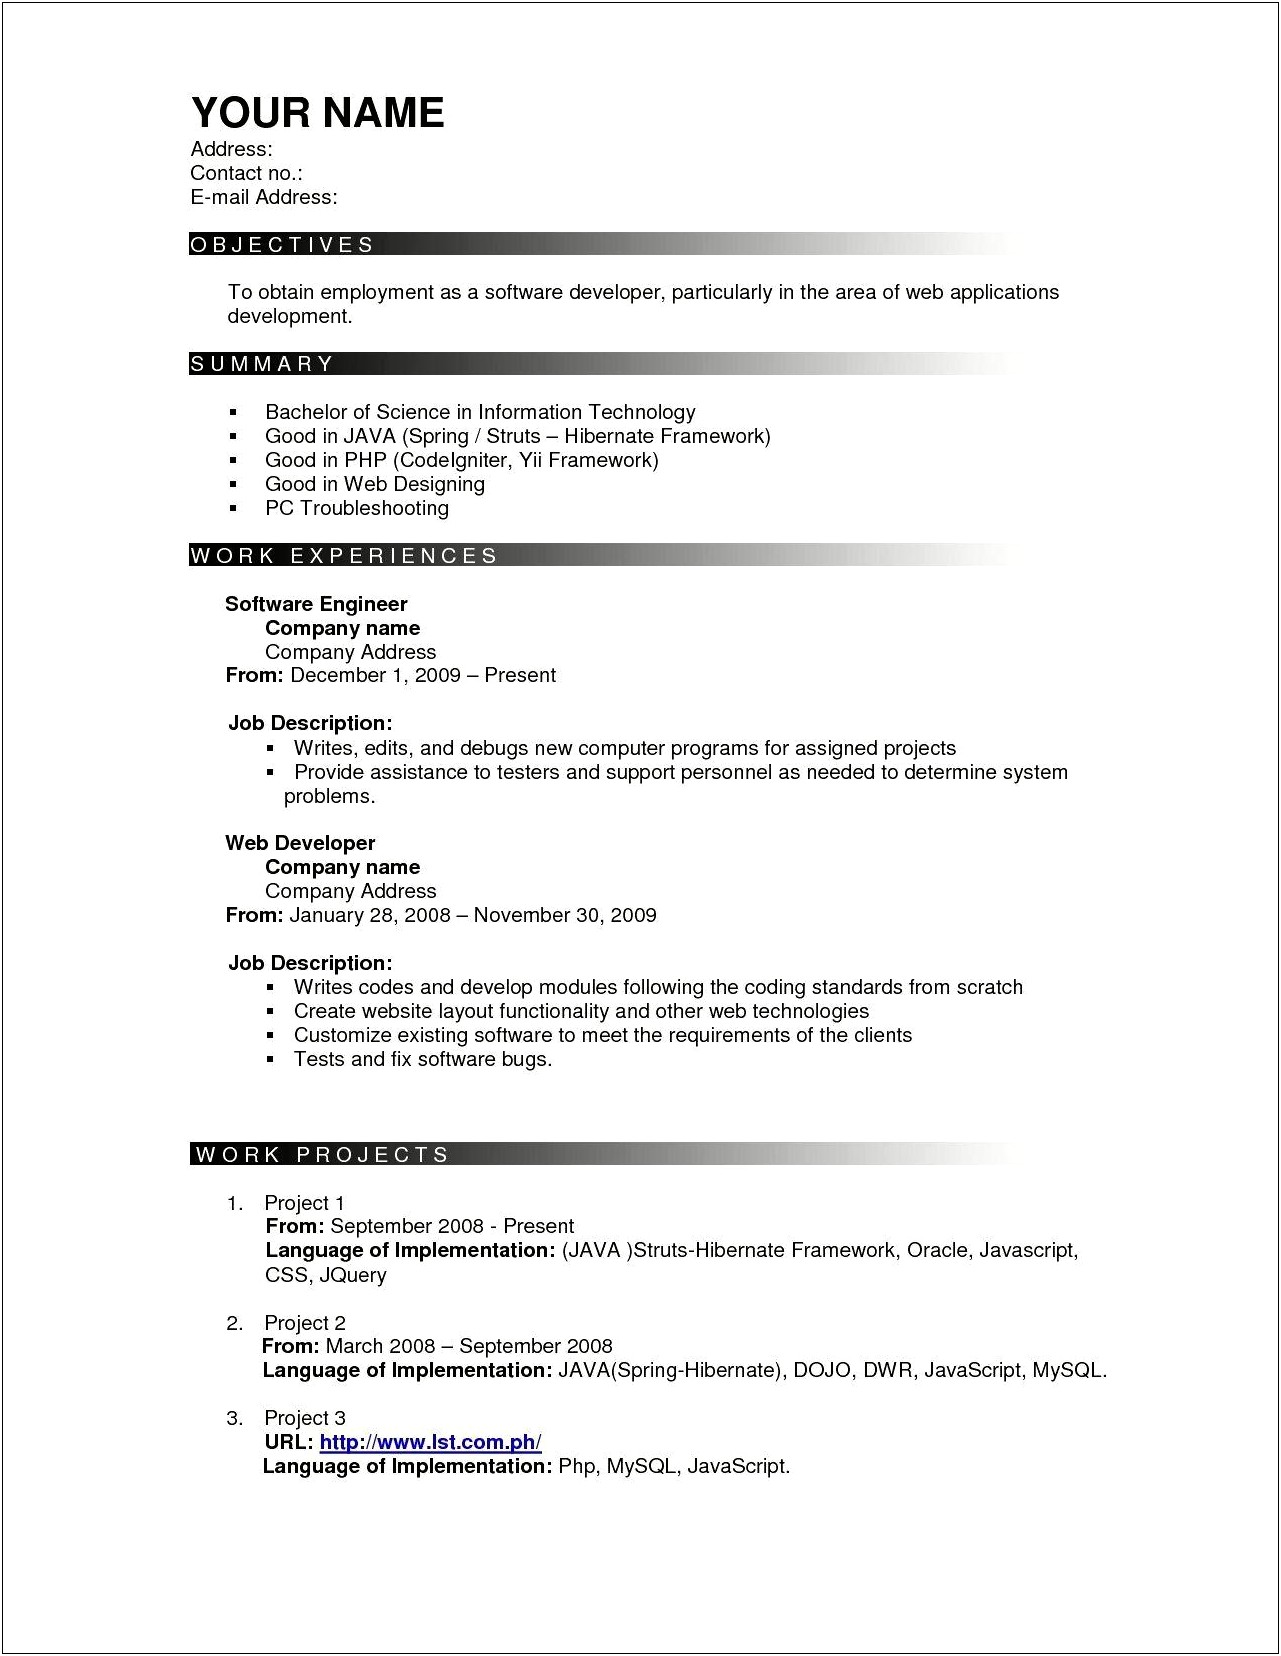 Experience Resume Format Three Year Experience